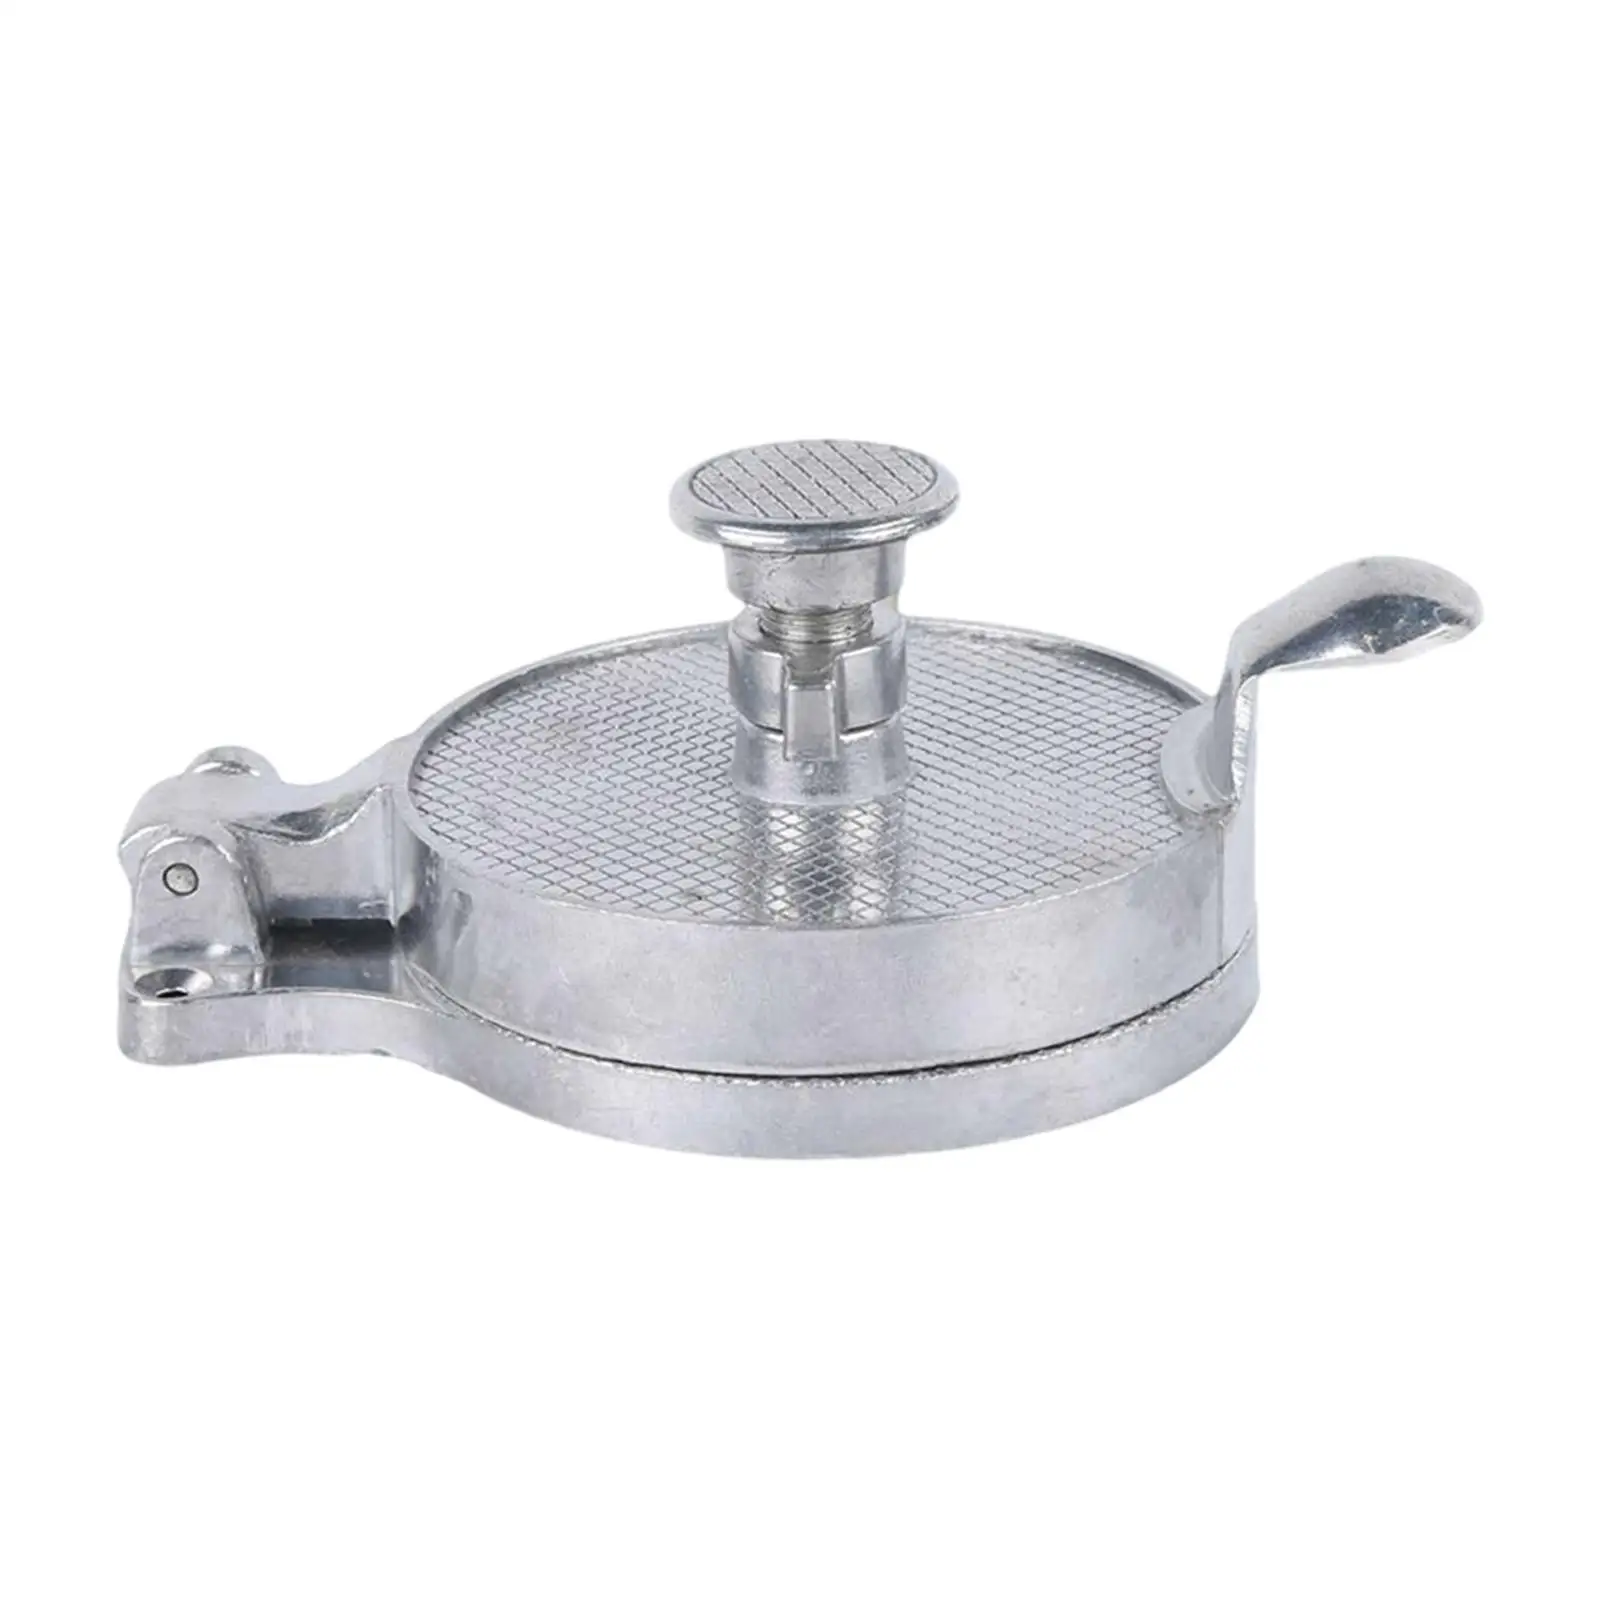 Stainless Steel Burger Press Hamburger Patty Maker for Barbecue Sandwiches